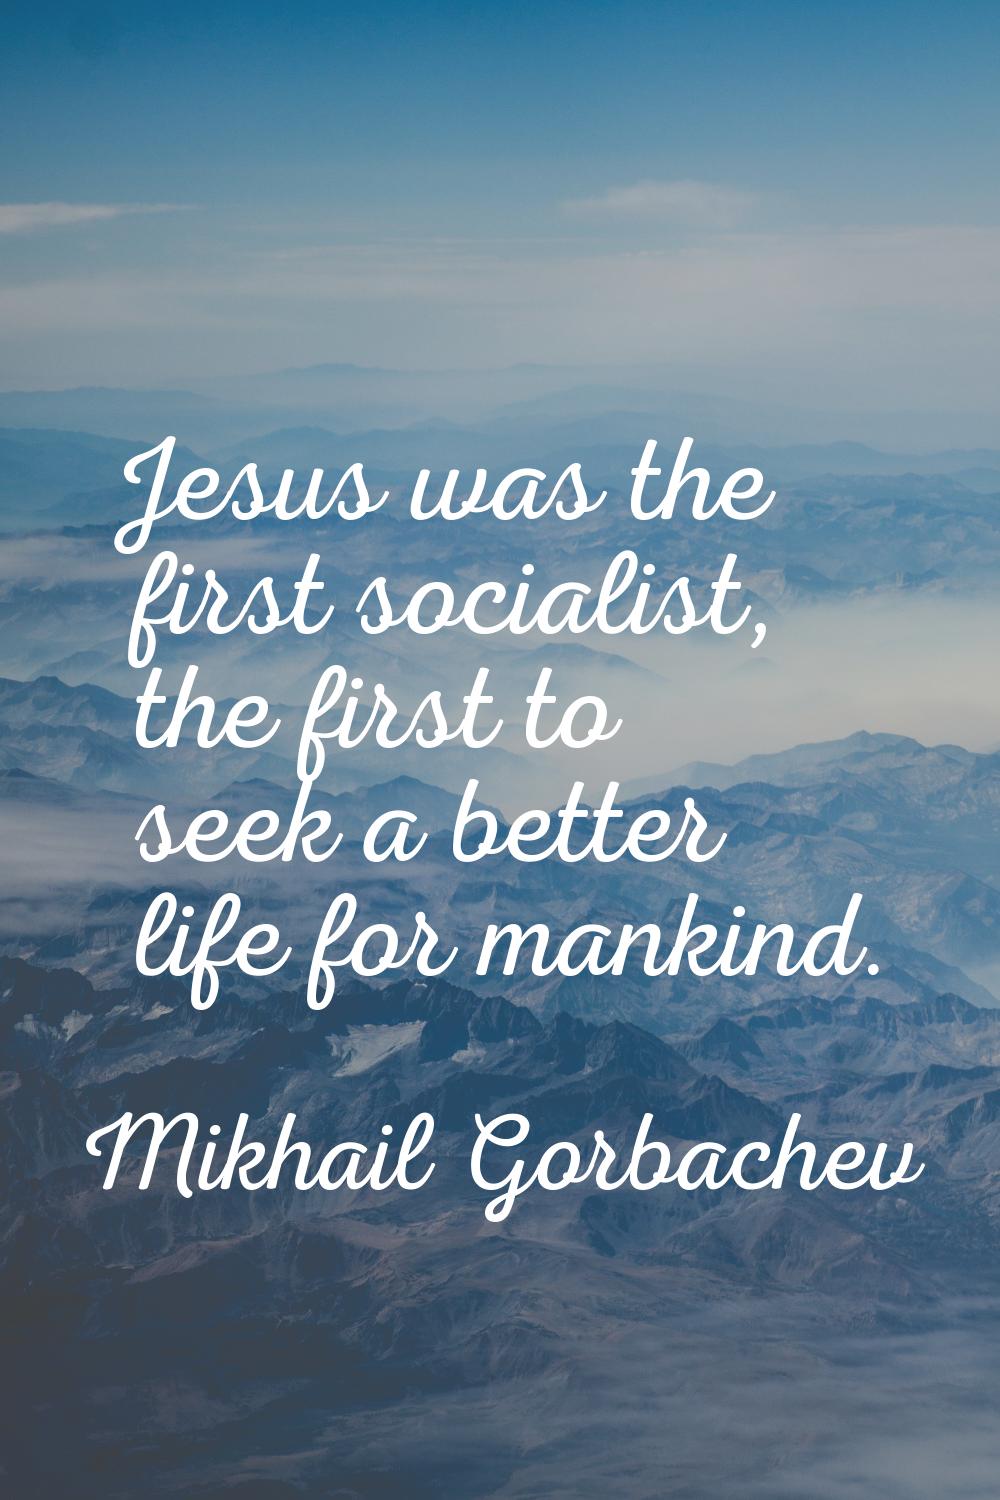 Jesus was the first socialist, the first to seek a better life for mankind.